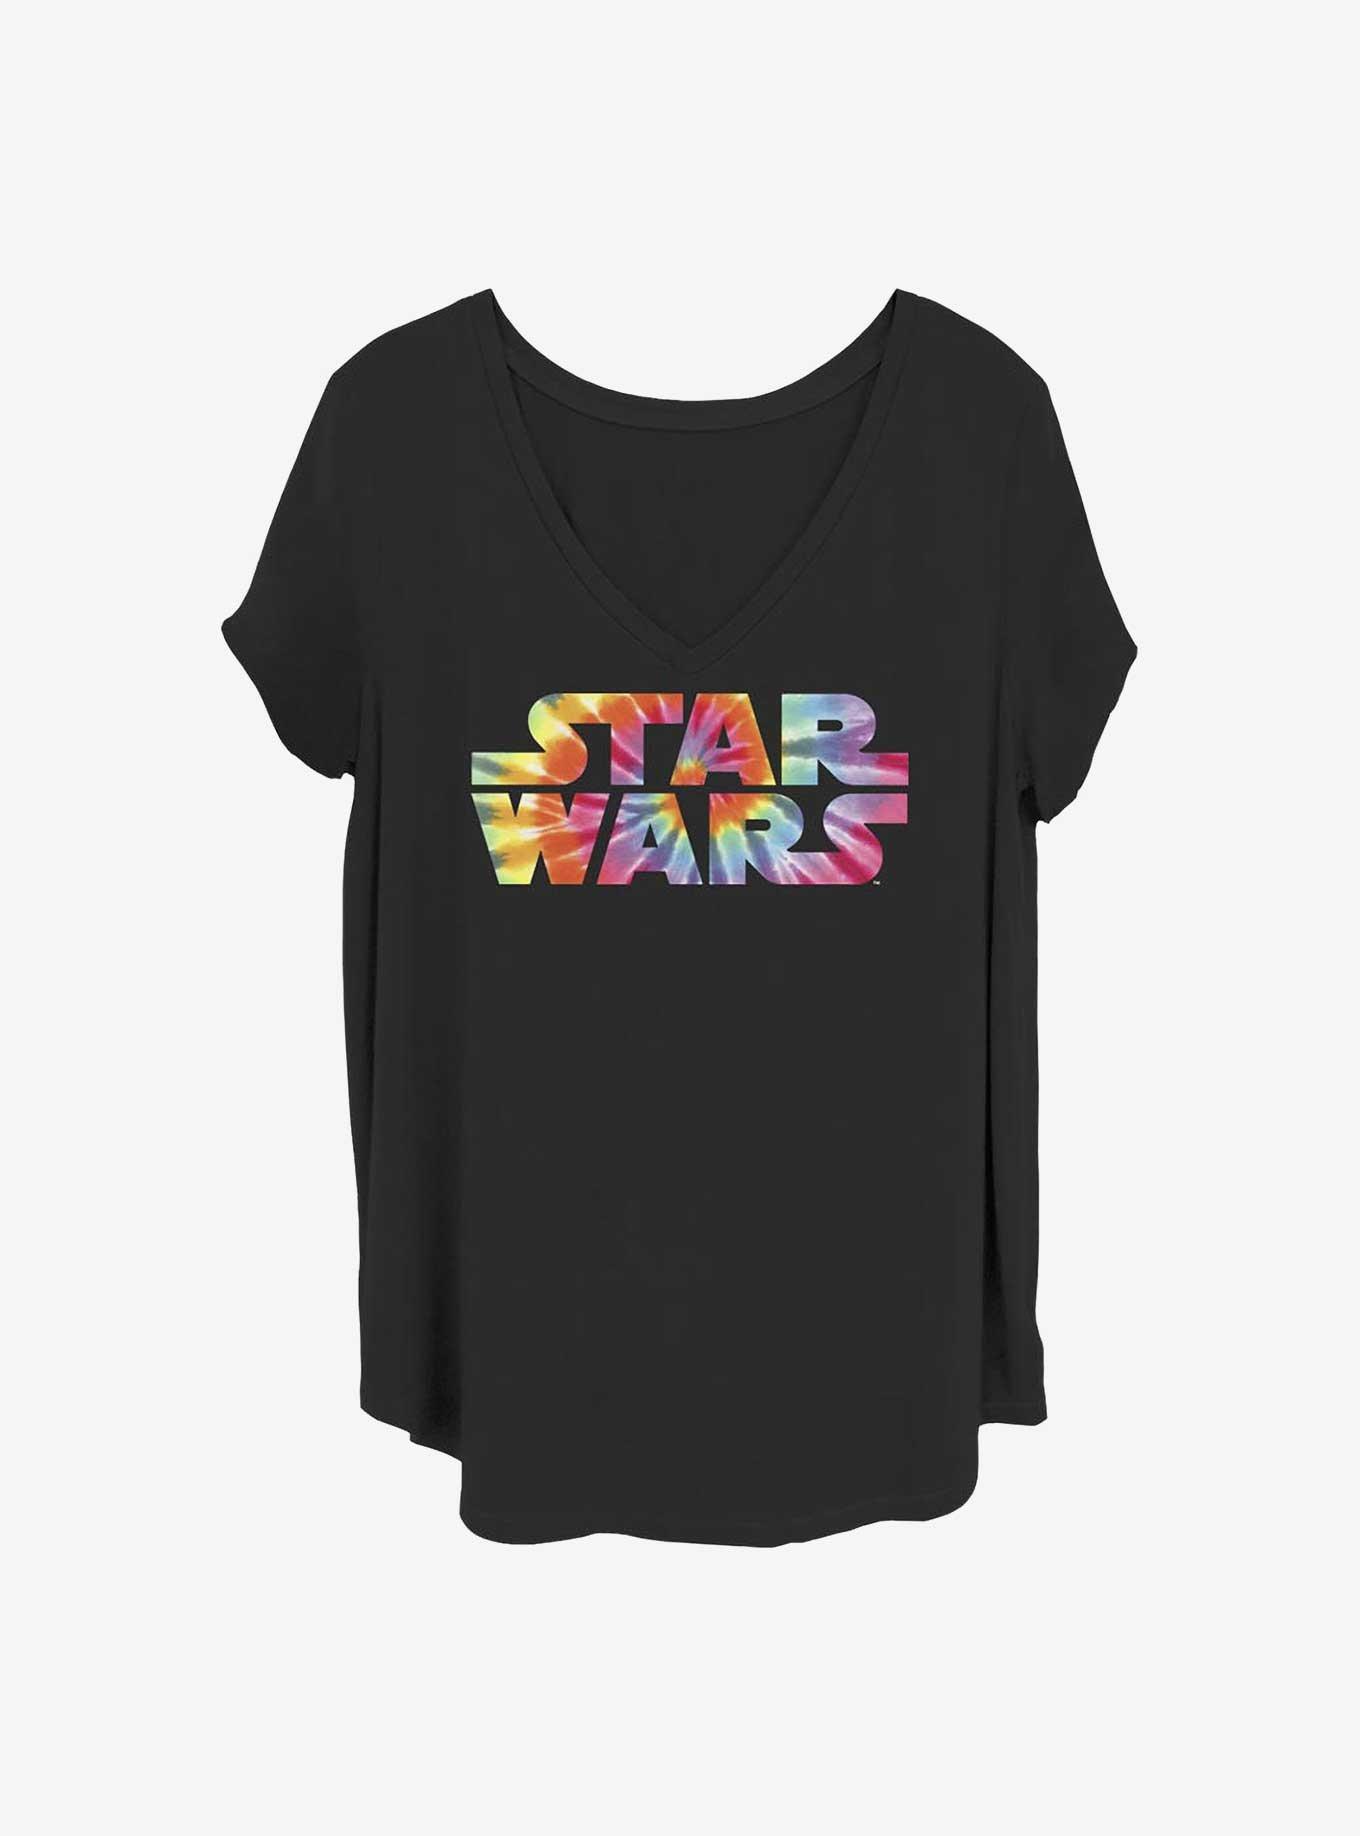 Star Wars To Dye For Girls T-Shirt Plus Size, , hi-res